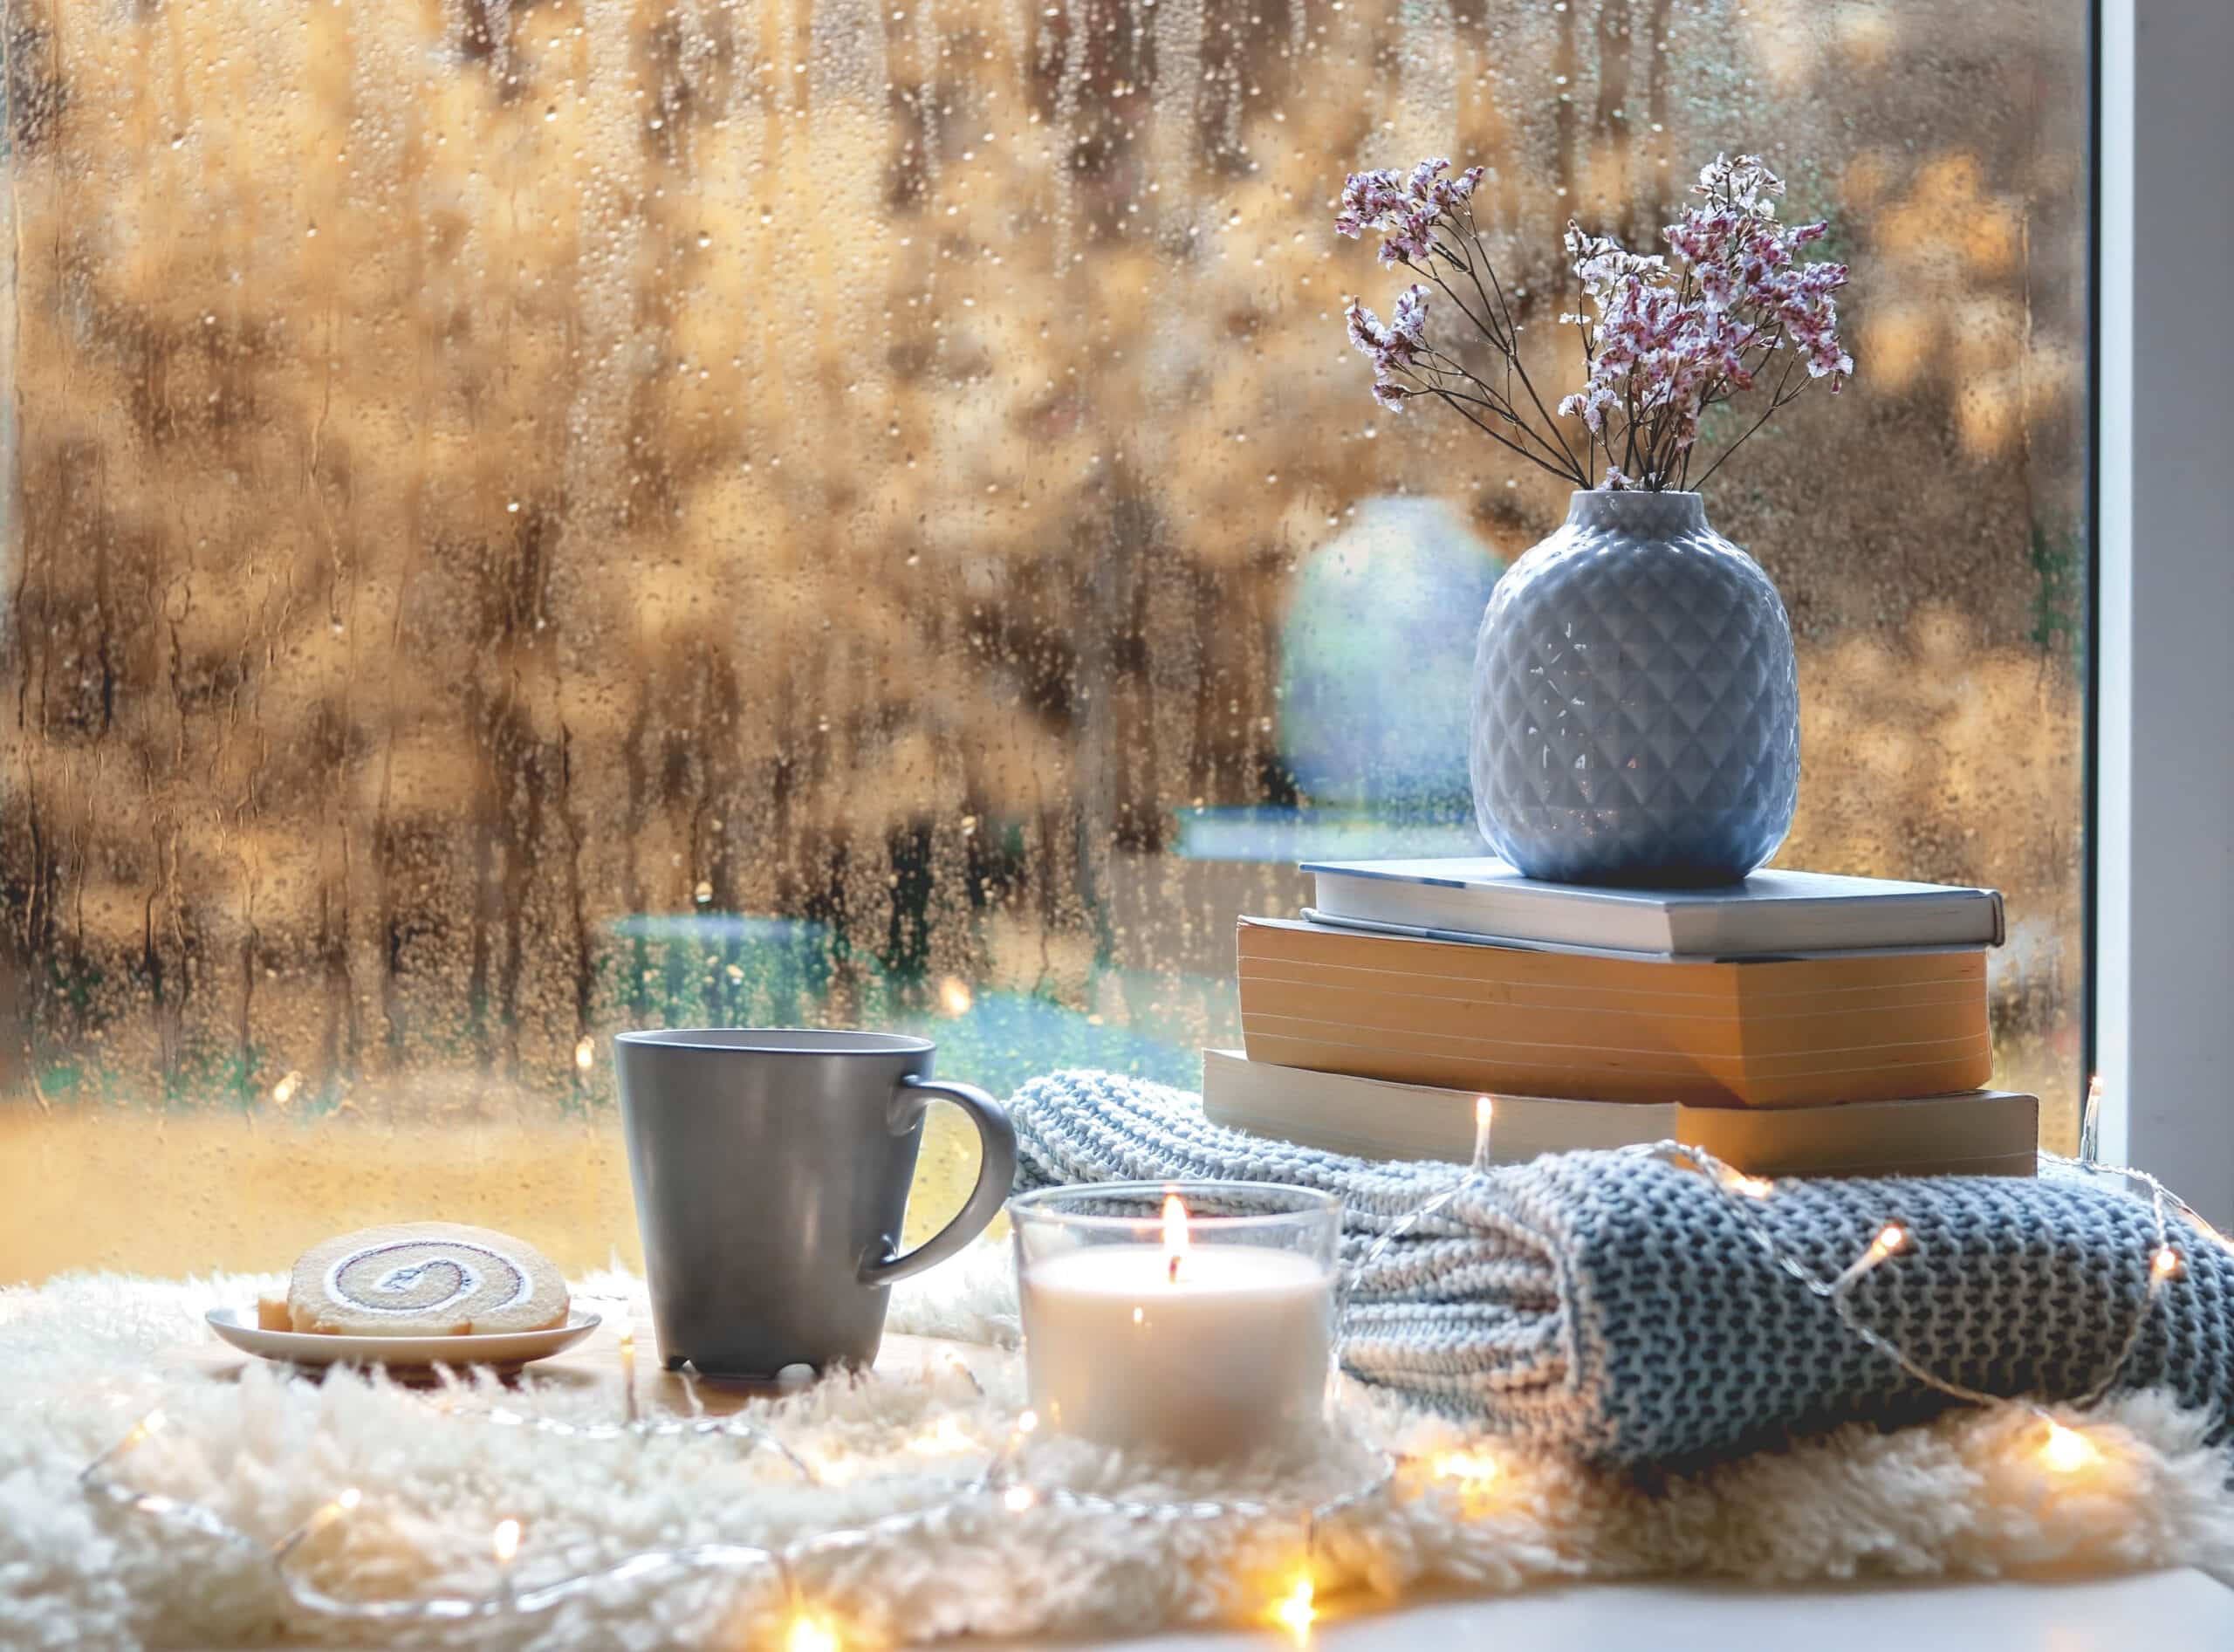 lit candle, a lit candle, flowers in vase on top of stacked books on the window sill, water drops on the glass.